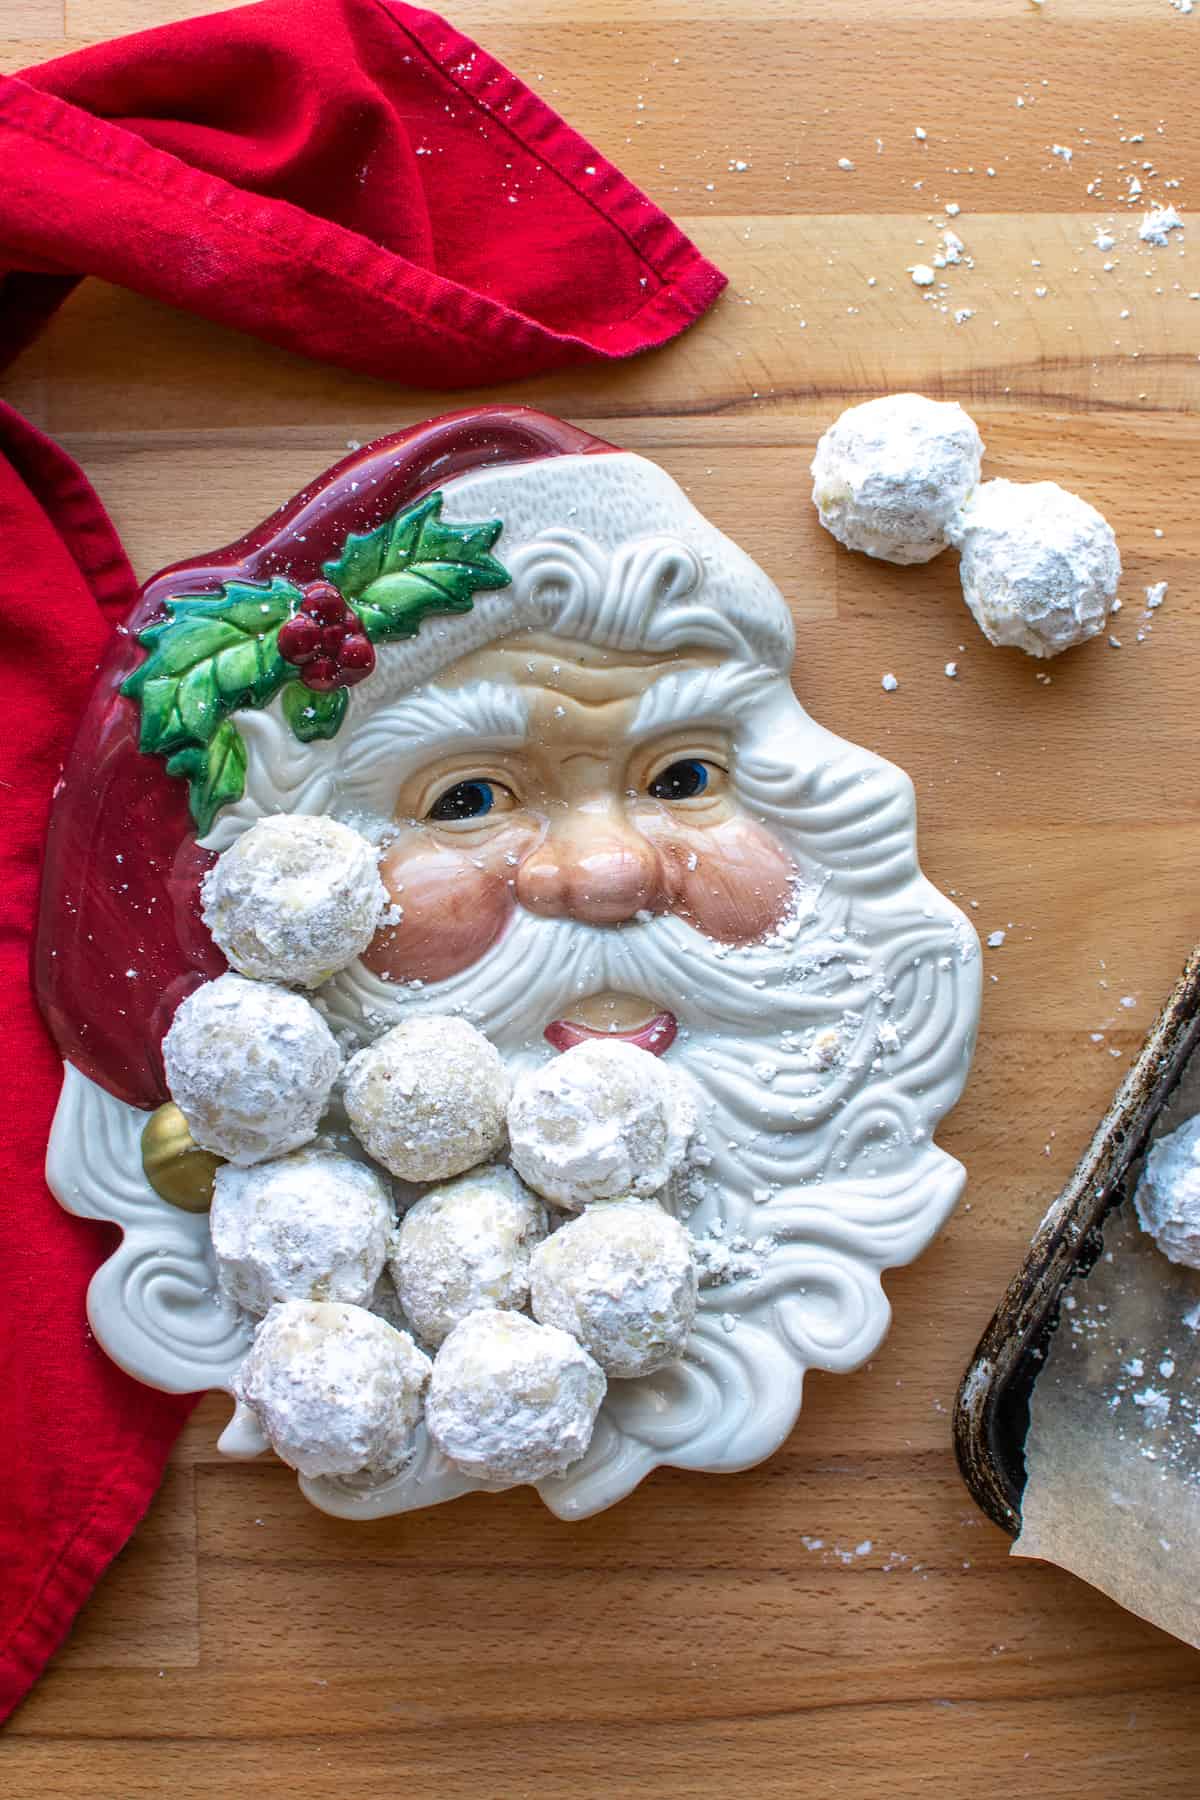 A Santa cookie plate with several Mexican wedding cookies on it sitting on a wood table by a red napkin.